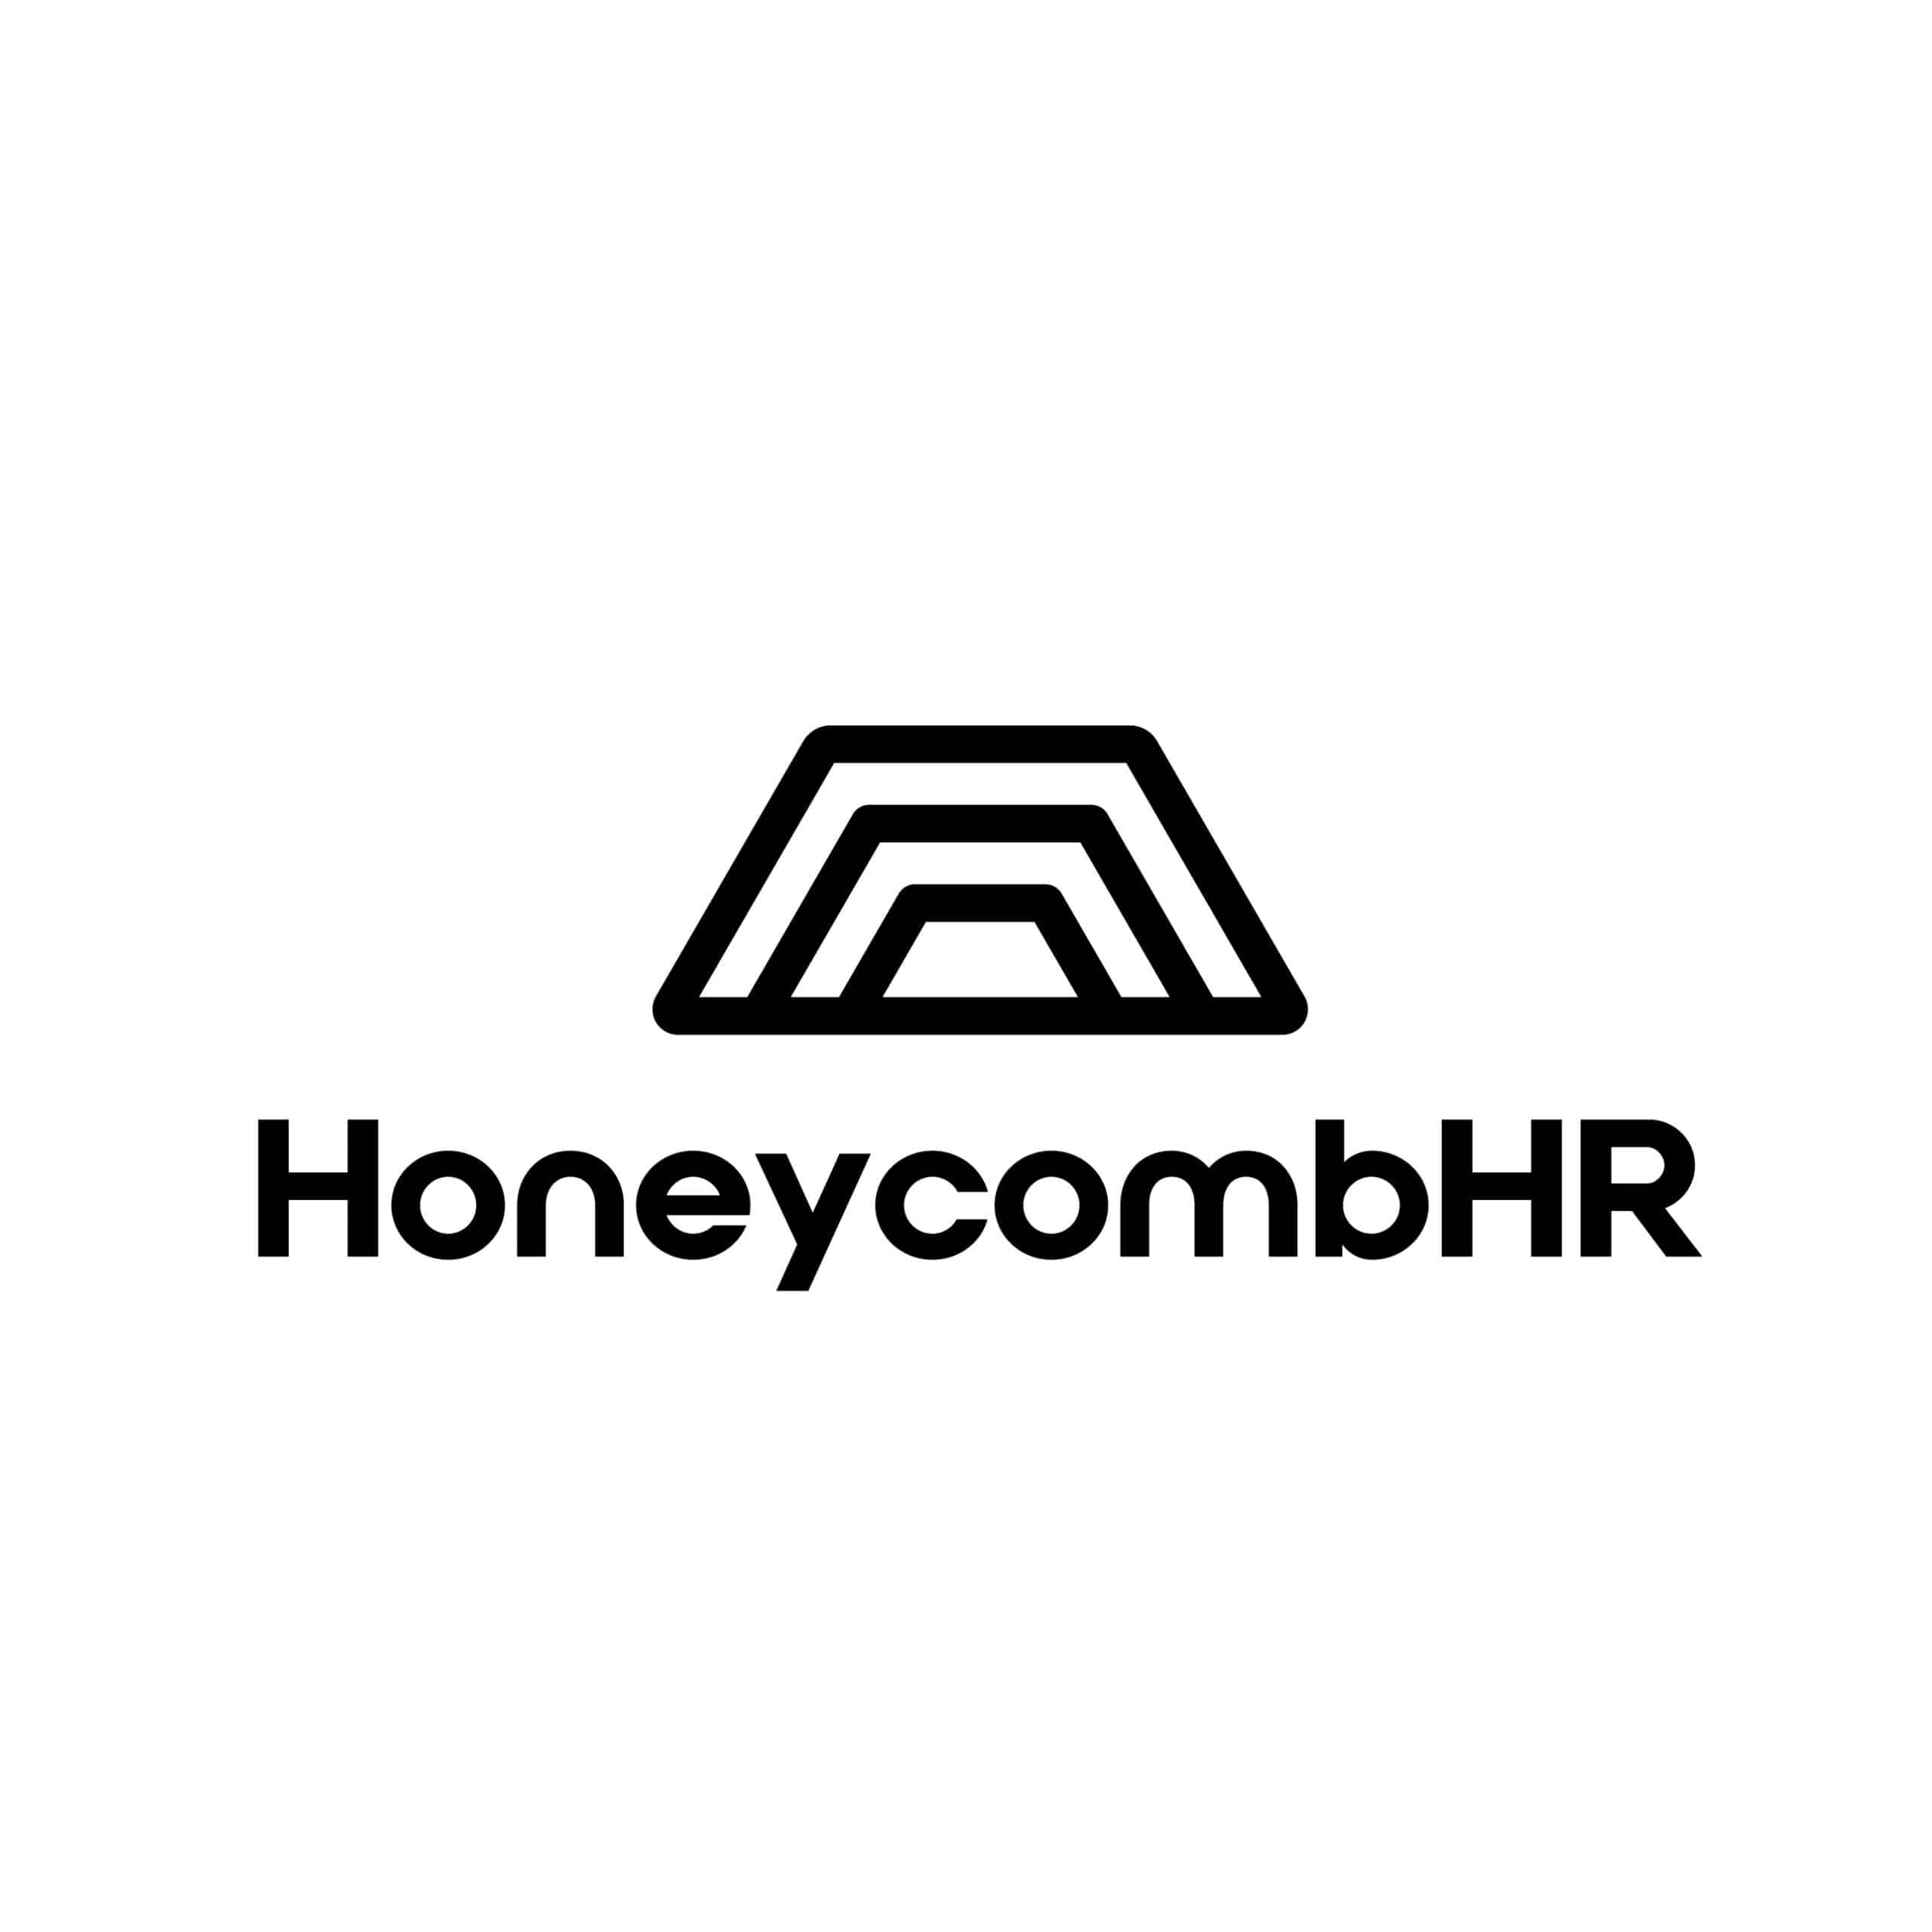 Honeycomb HR logo design of a honeycomb sunset by Stellen Design Graphic Design and Branding Agency in Los Angeles California